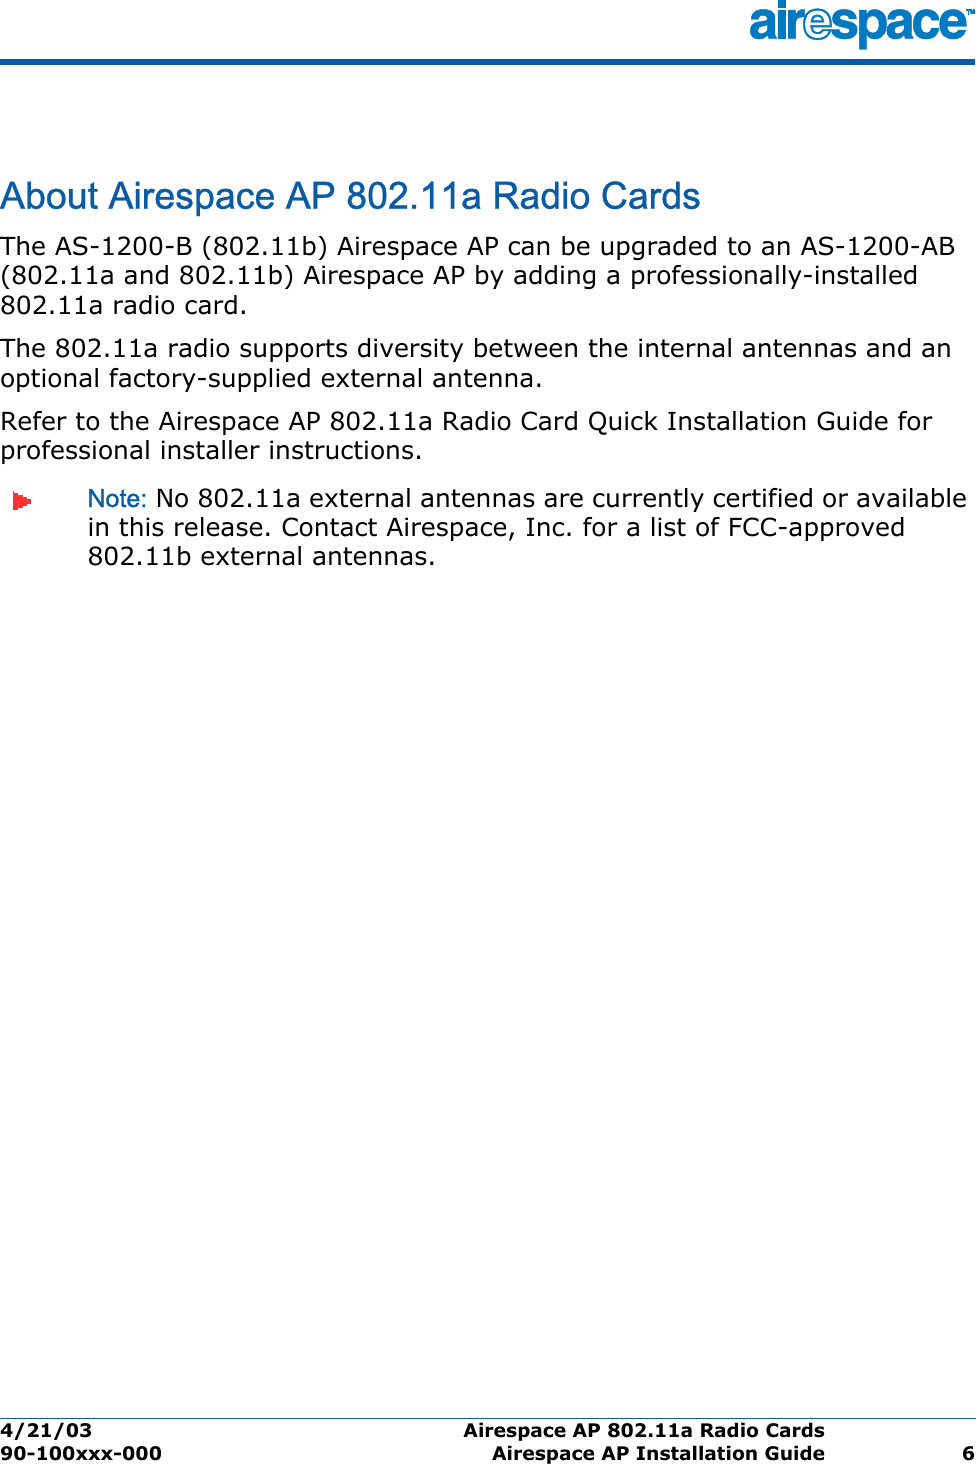 4/21/03 Airespace AP 802.11a Radio Cards  90-100xxx-000 Airespace AP Installation Guide 6Airespace AP 802.11a Radio CardsAbout Airespace AP 802.11a Radio CardsThe AS-1200-B (802.11b) Airespace AP can be upgraded to an AS-1200-AB (802.11a and 802.11b) Airespace AP by adding a professionally-installed 802.11a radio card. The 802.11a radio supports diversity between the internal antennas and an optional factory-supplied external antenna. Refer to the Airespace AP 802.11a Radio Card Quick Installation Guide for professional installer instructions. Note: No 802.11a external antennas are currently certified or available in this release. Contact Airespace, Inc. for a list of FCC-approved 802.11b external antennas. 